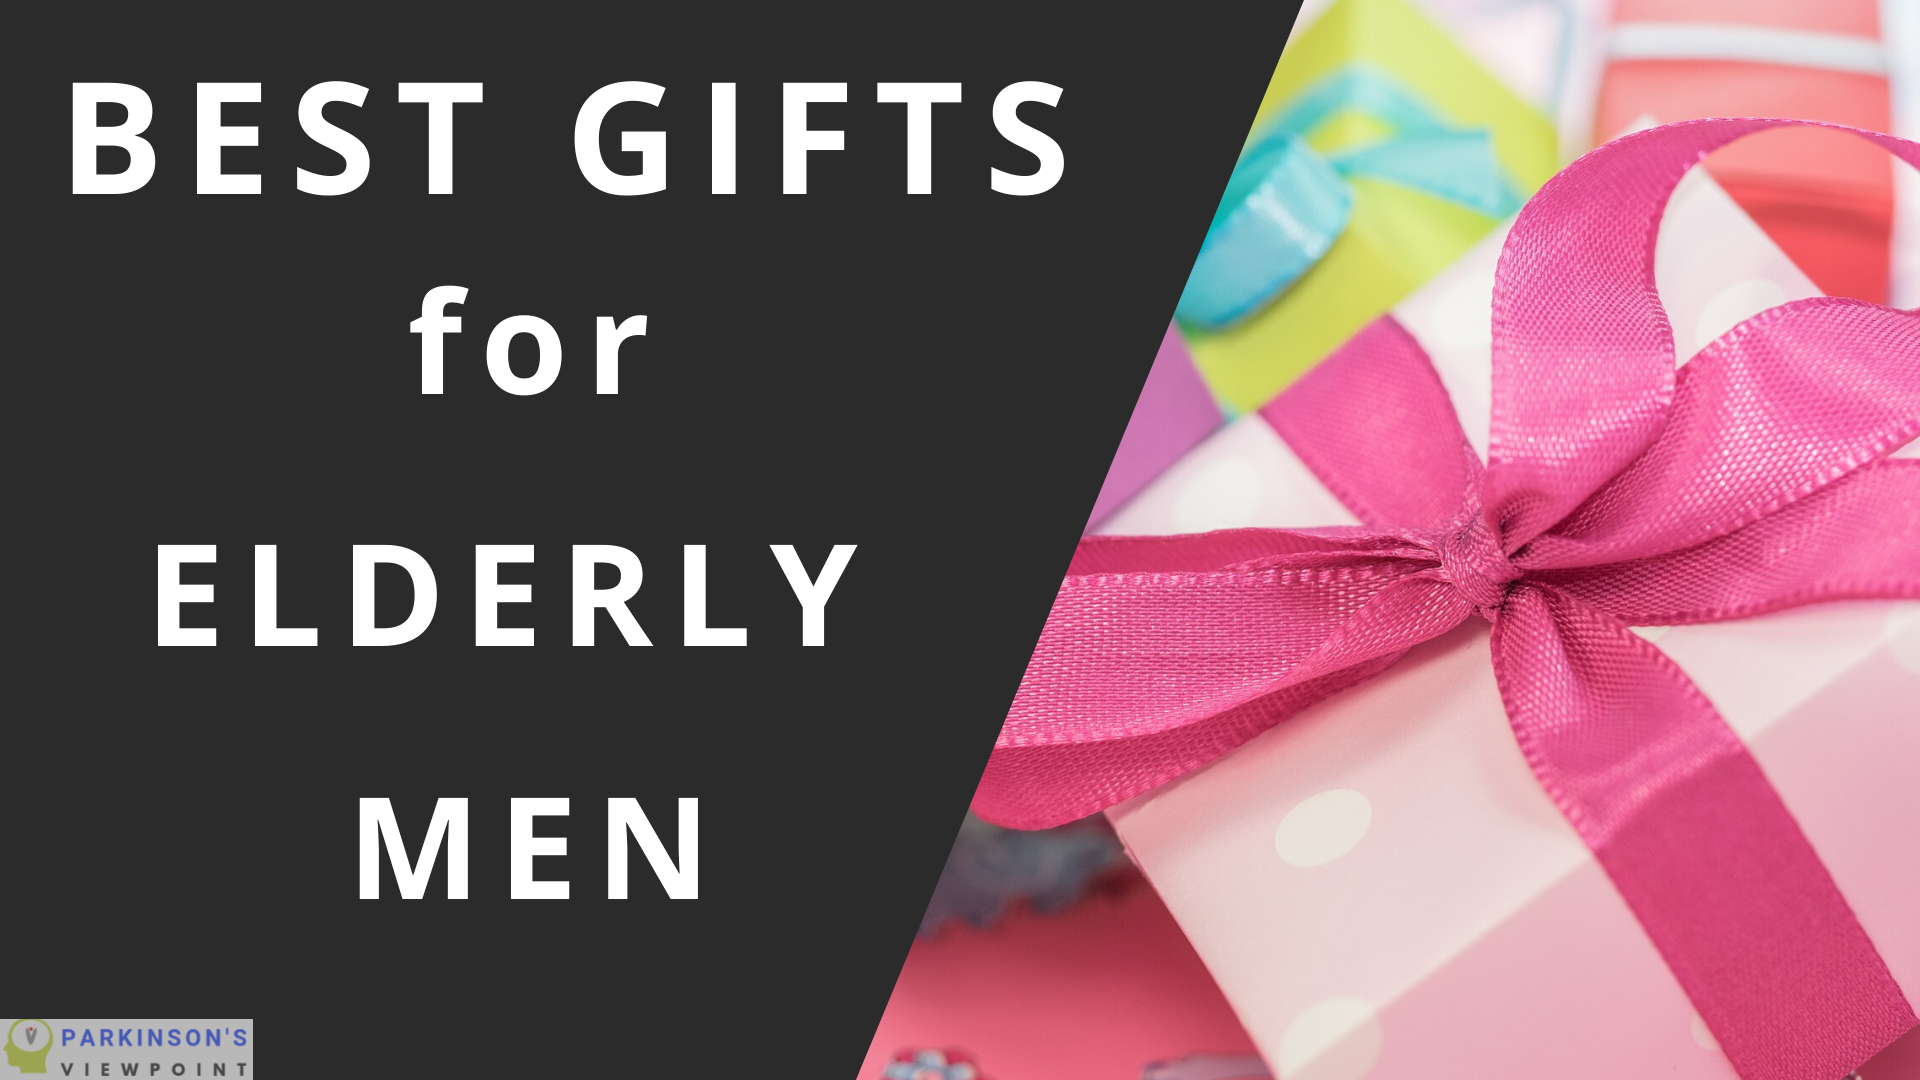 Birthday Gift For Elderly Man : ELDERLY GIFT BASKET ~ #MyCareGivingStory #cBias #ad ... - Find awesome gift ideas that the senior man is sure to love!